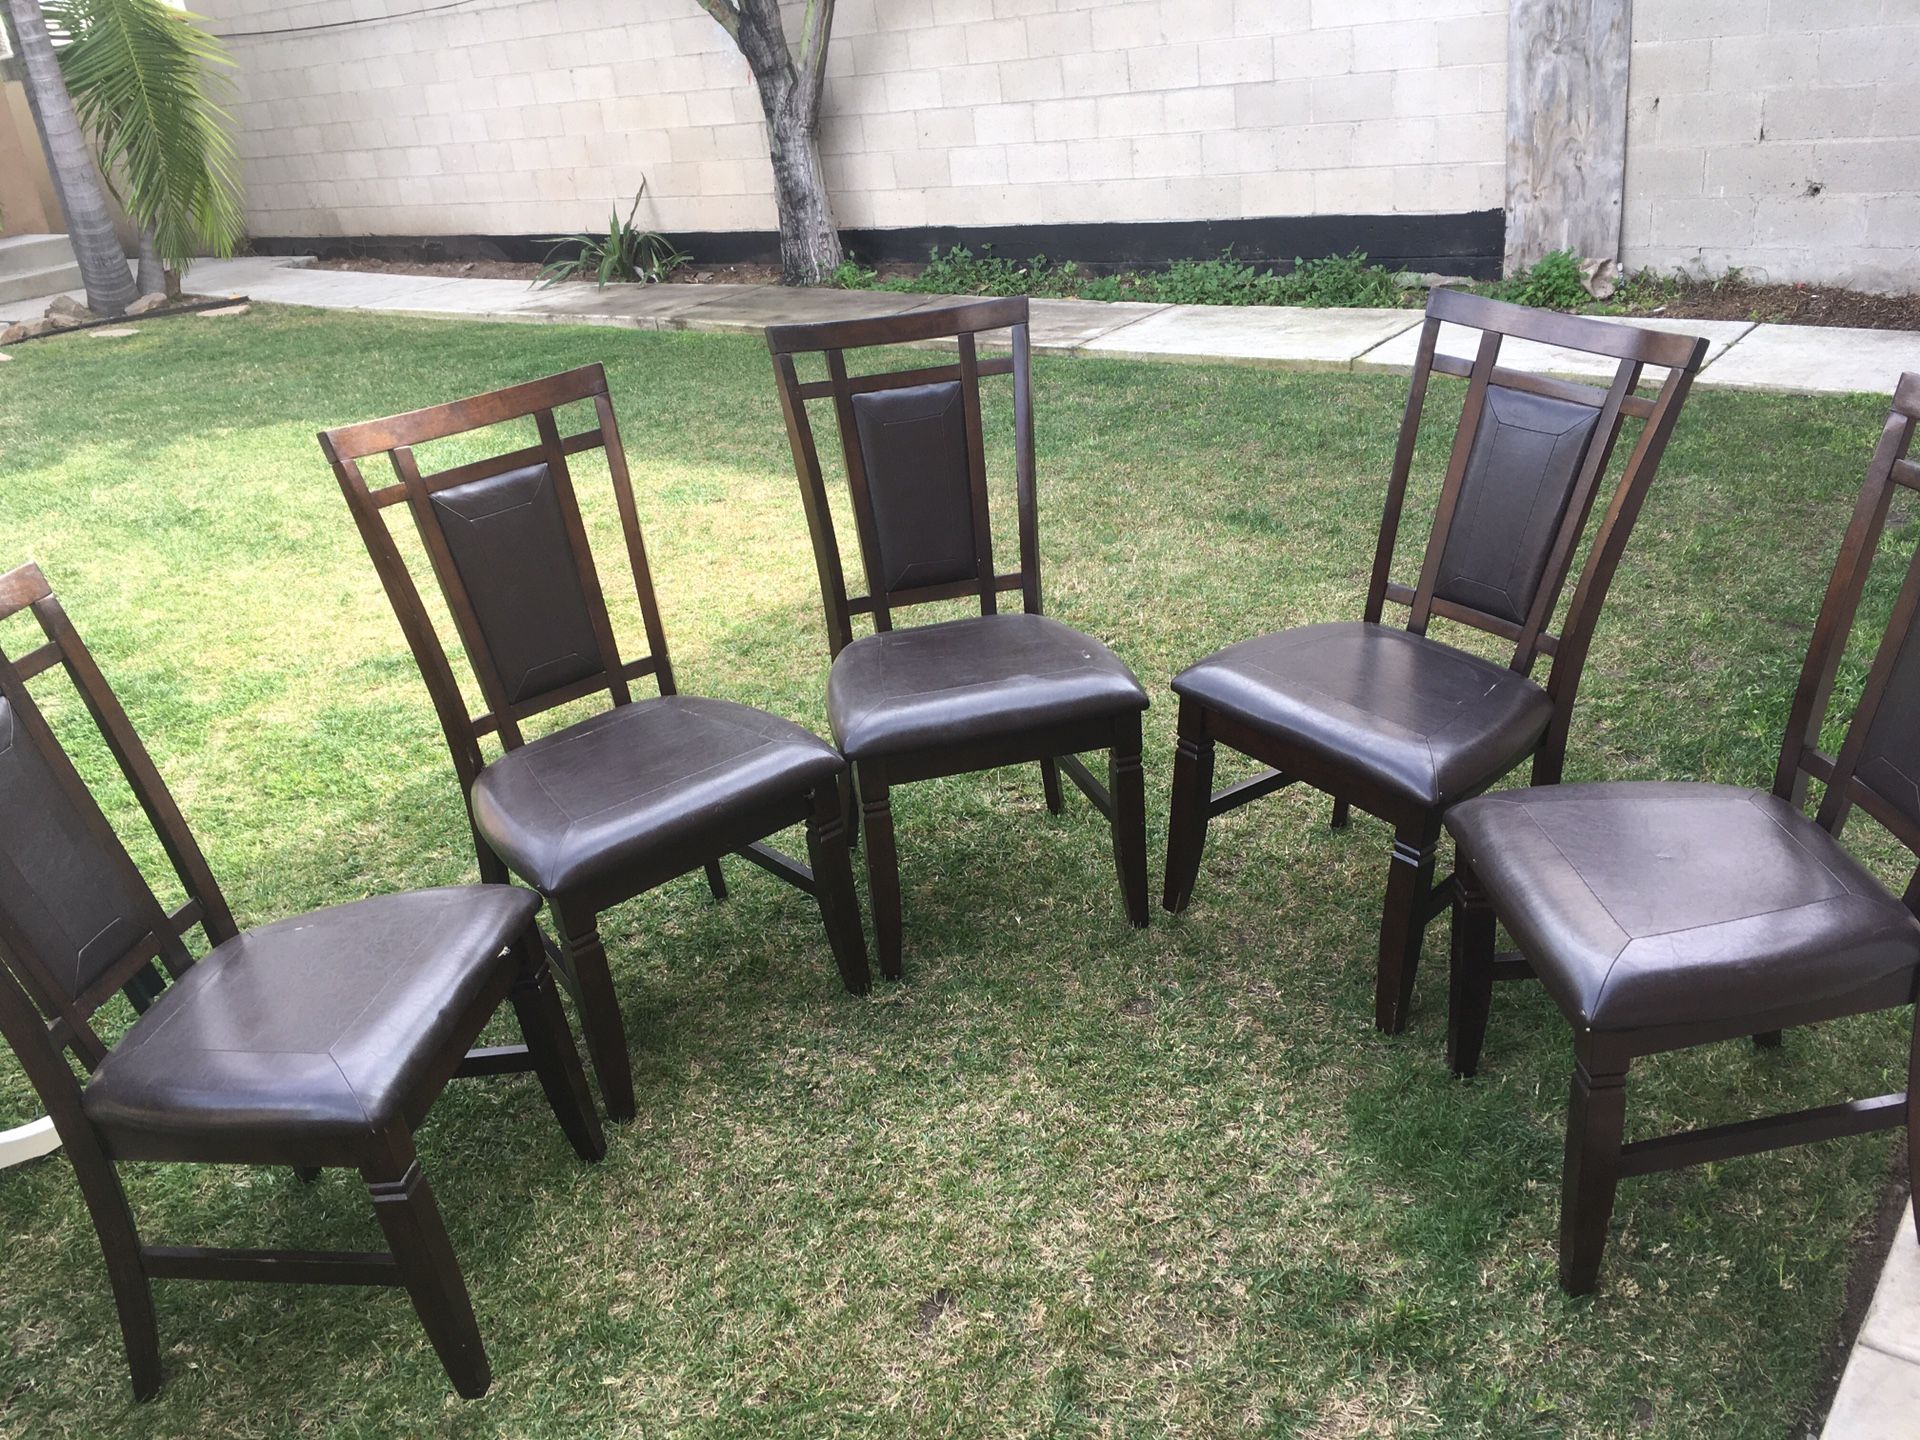 5 wood padded chairs